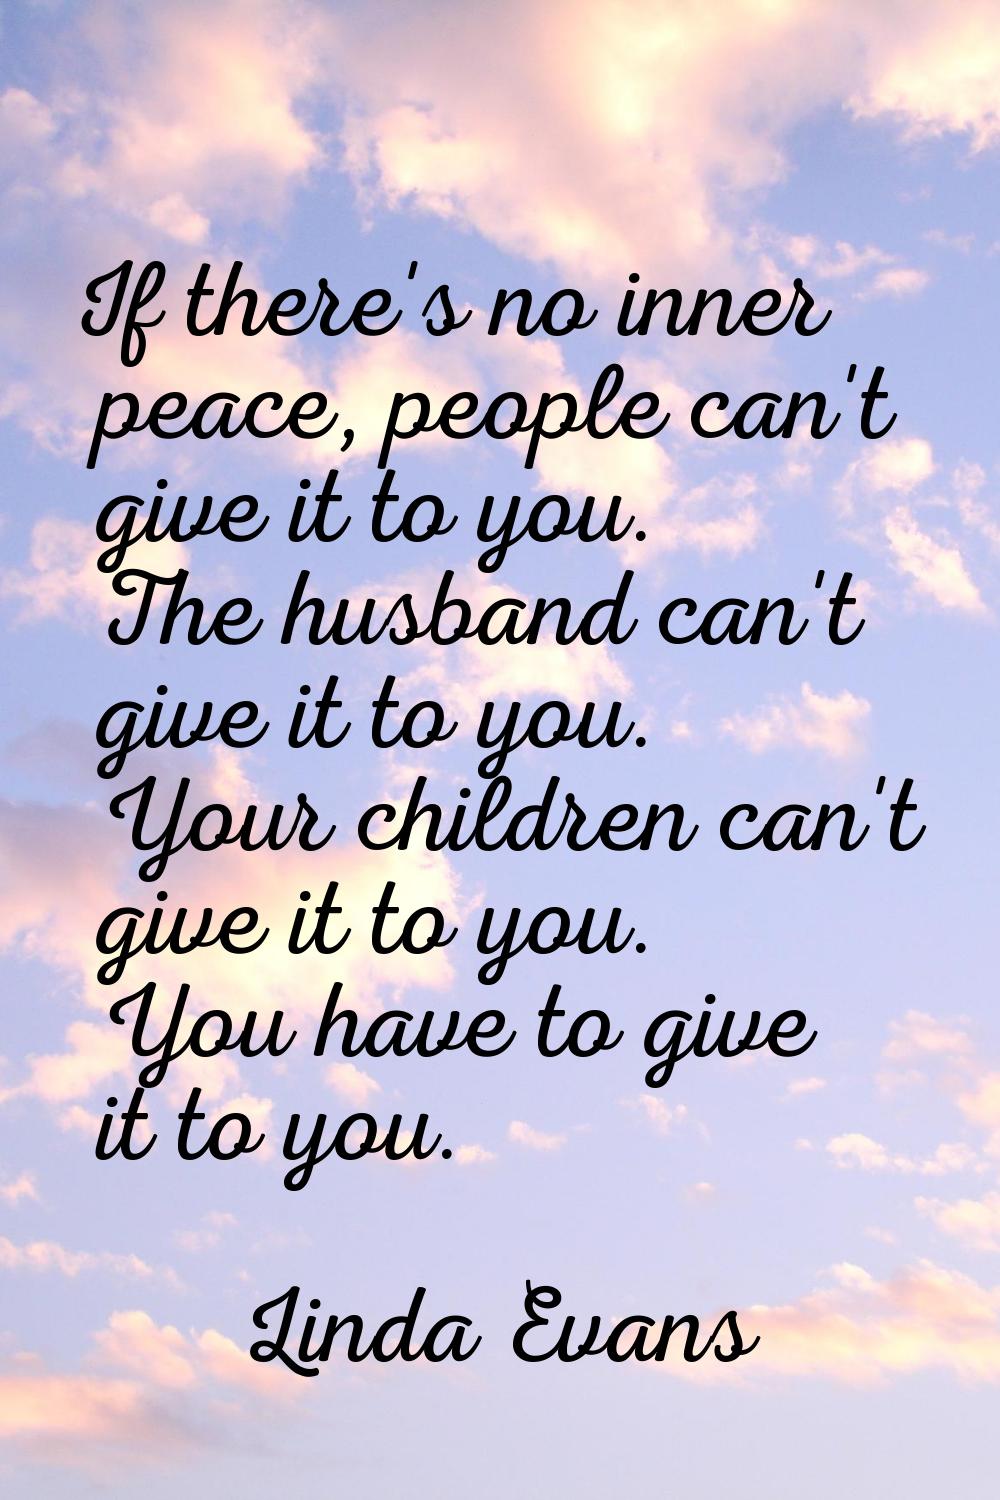 If there's no inner peace, people can't give it to you. The husband can't give it to you. Your chil